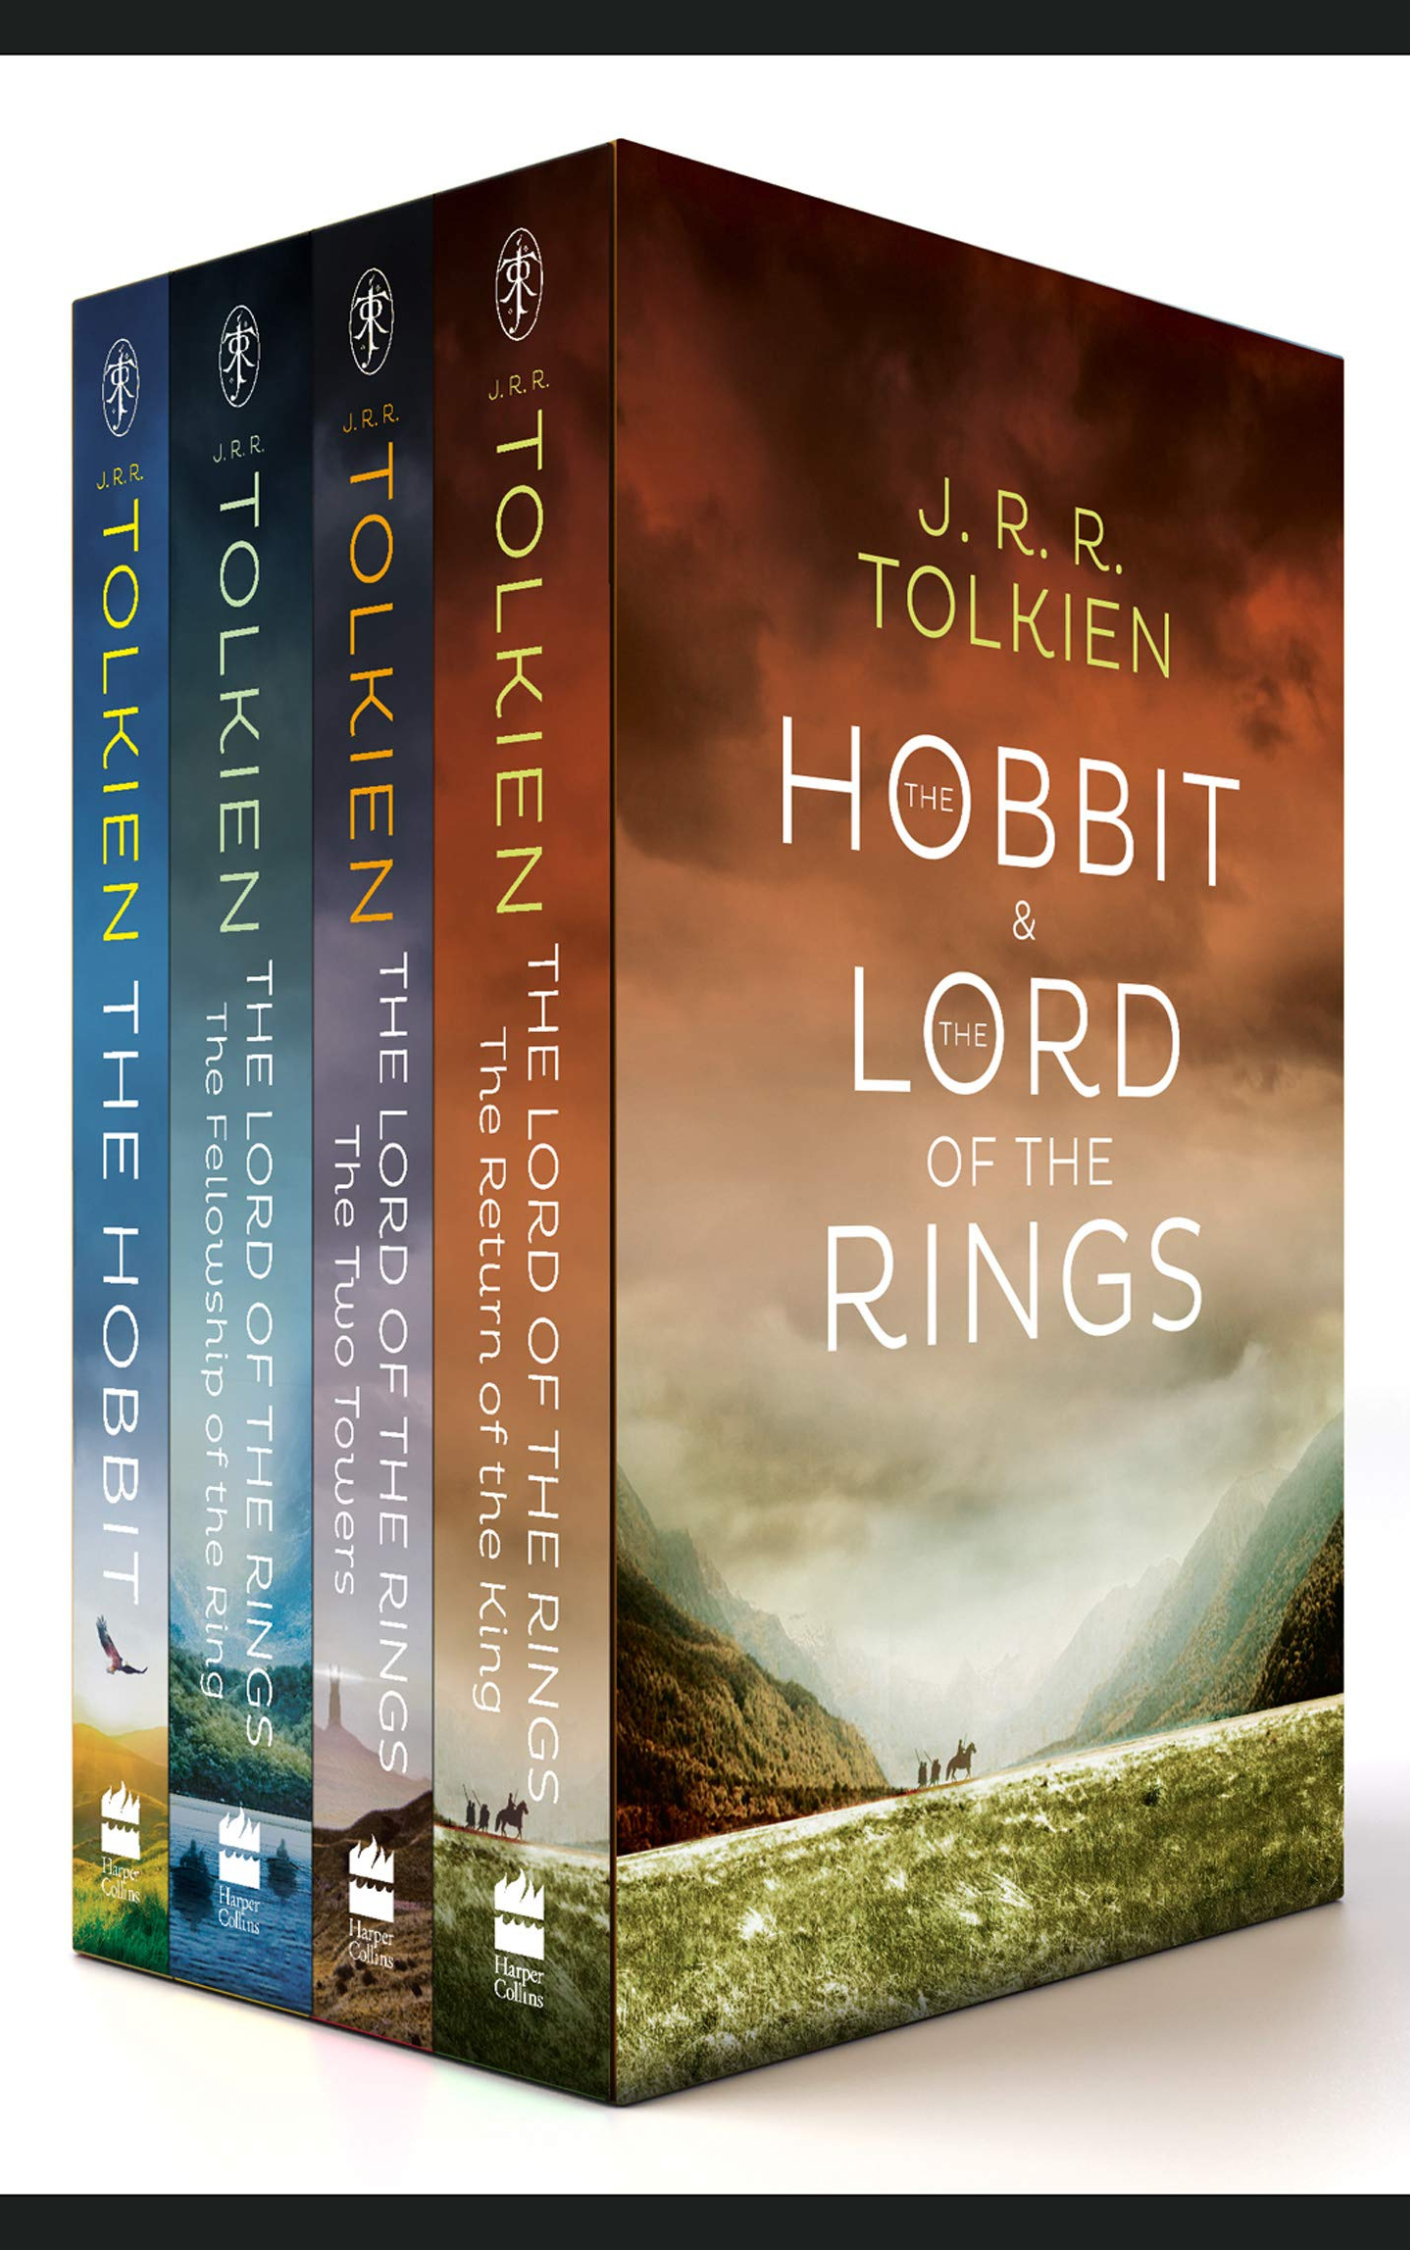 THE HOBBIT AND THE LORD OF THE RINGS [4 BOOKS] BOXED SET by JRR TOLKIEN